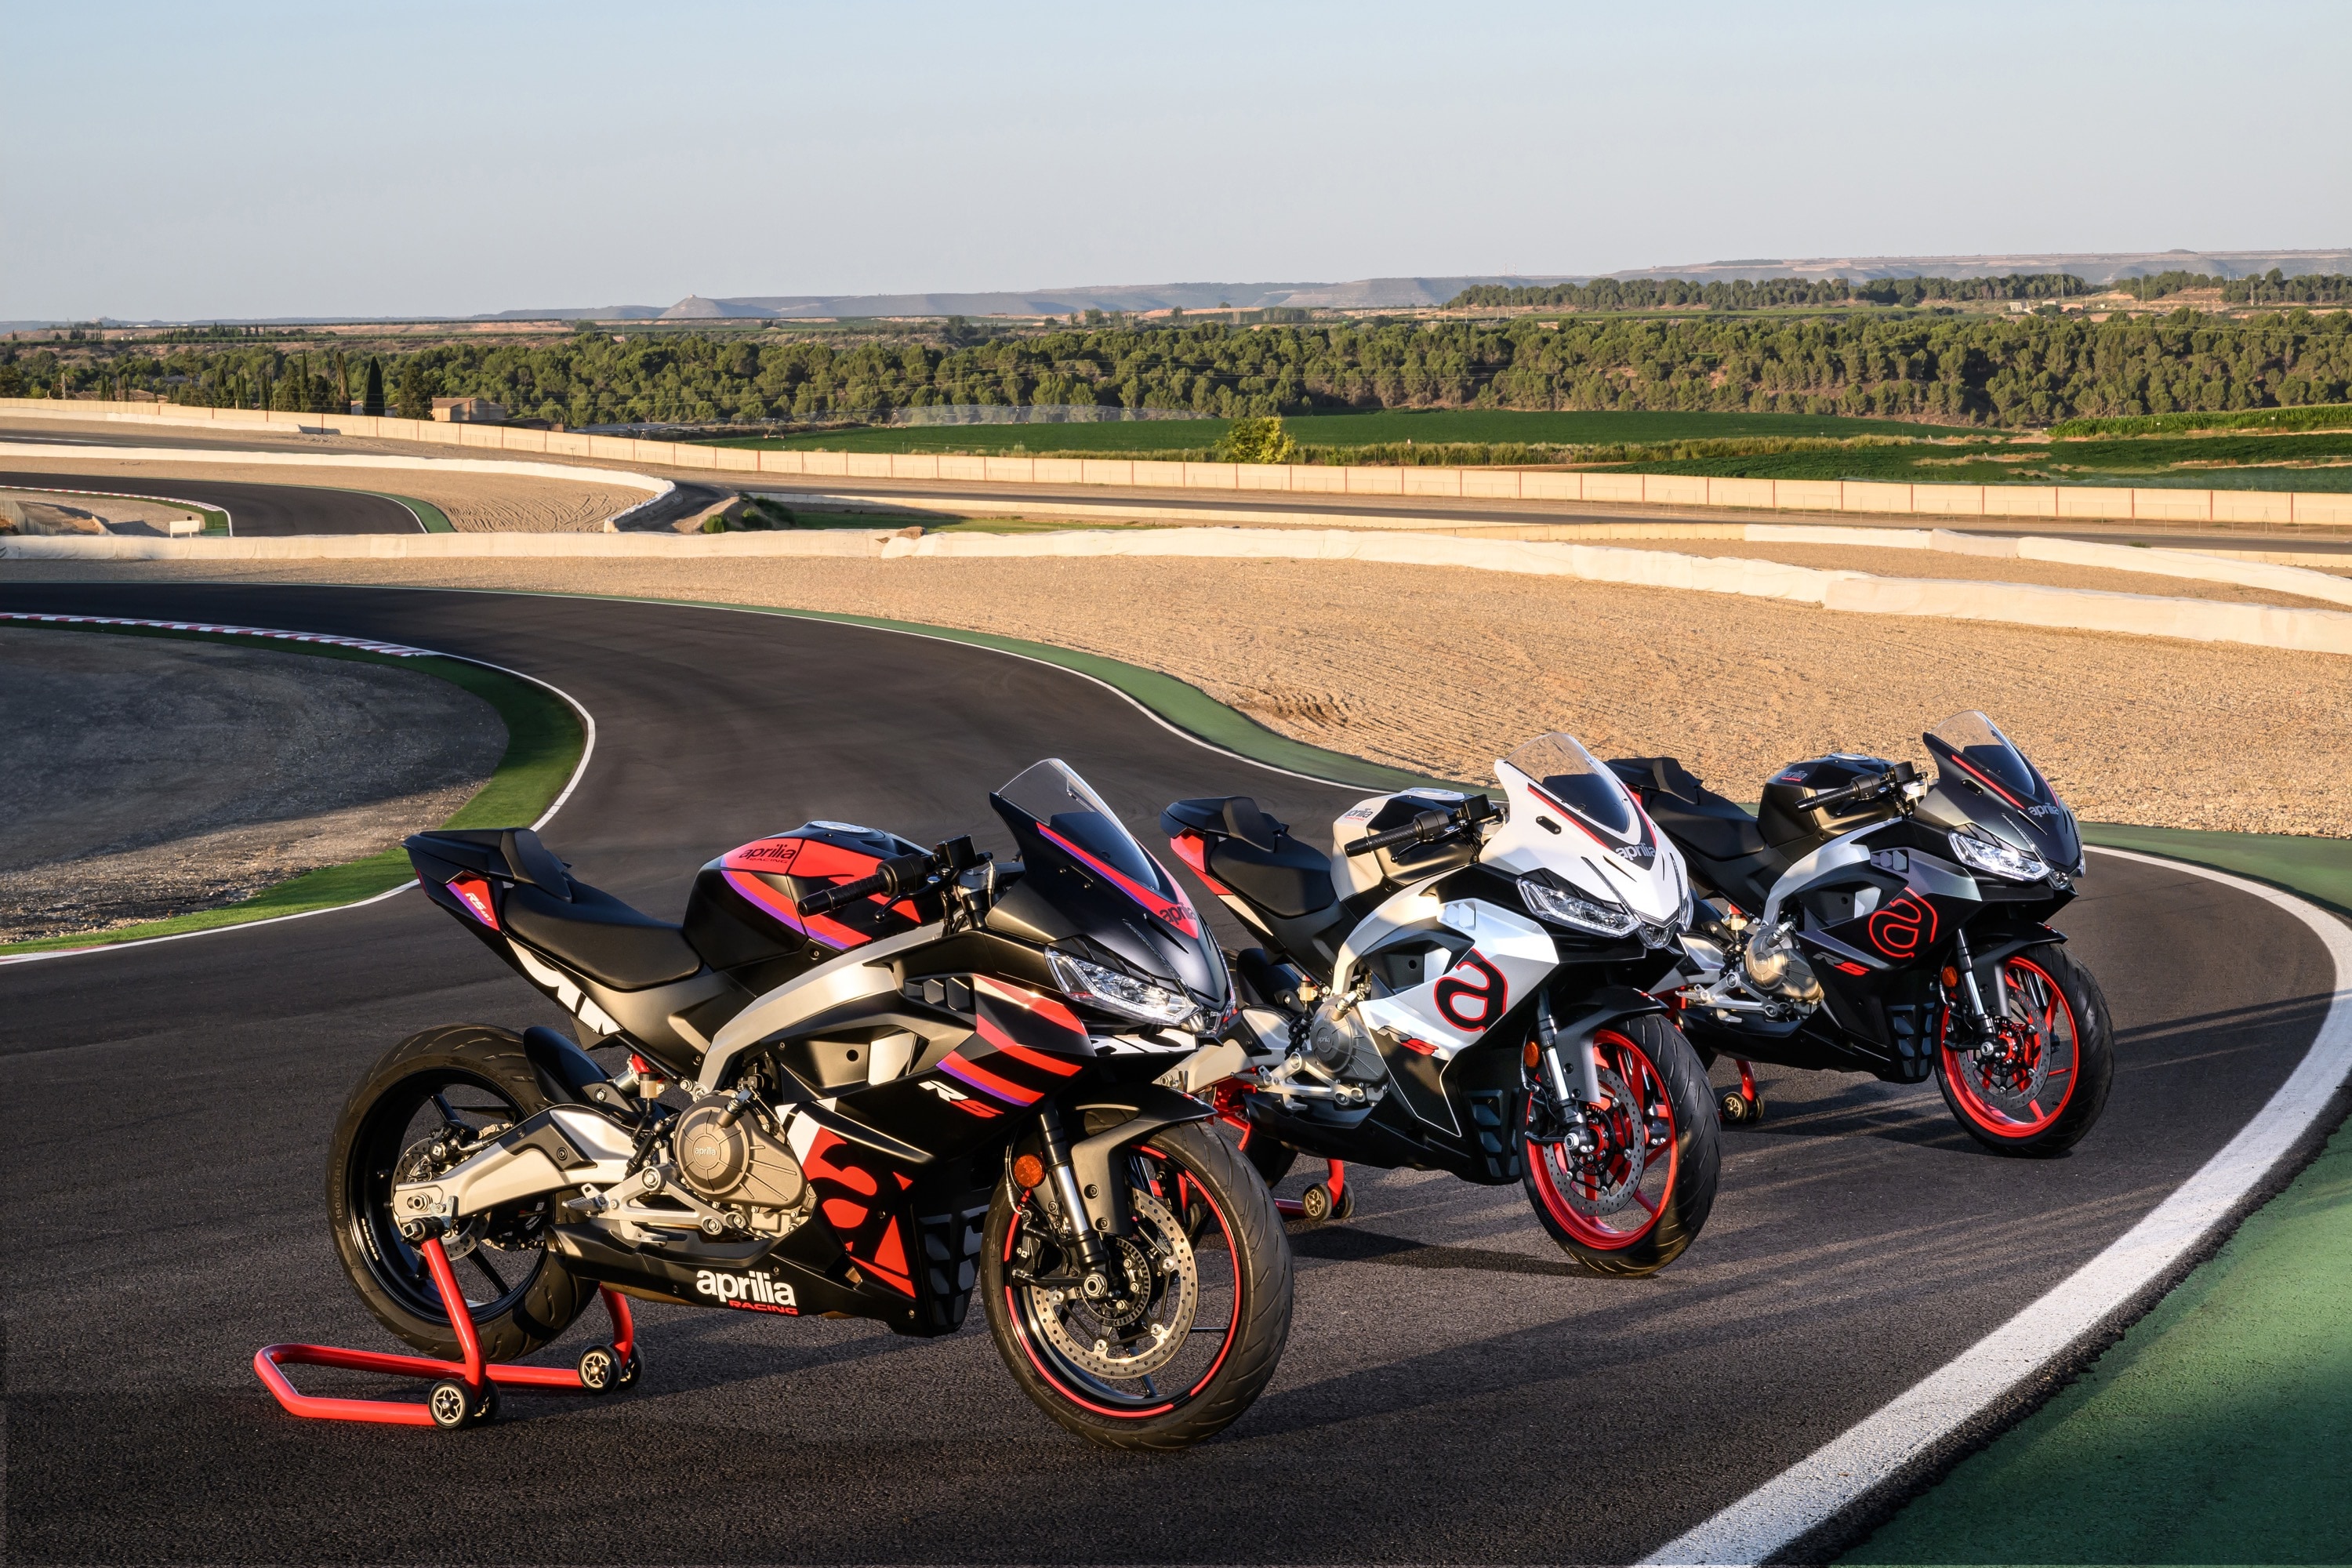 The Aprilia RS 457 gets ride-by-wire, three-level traction control, switchable dual-channel ABS and a quickshifter as an accessory